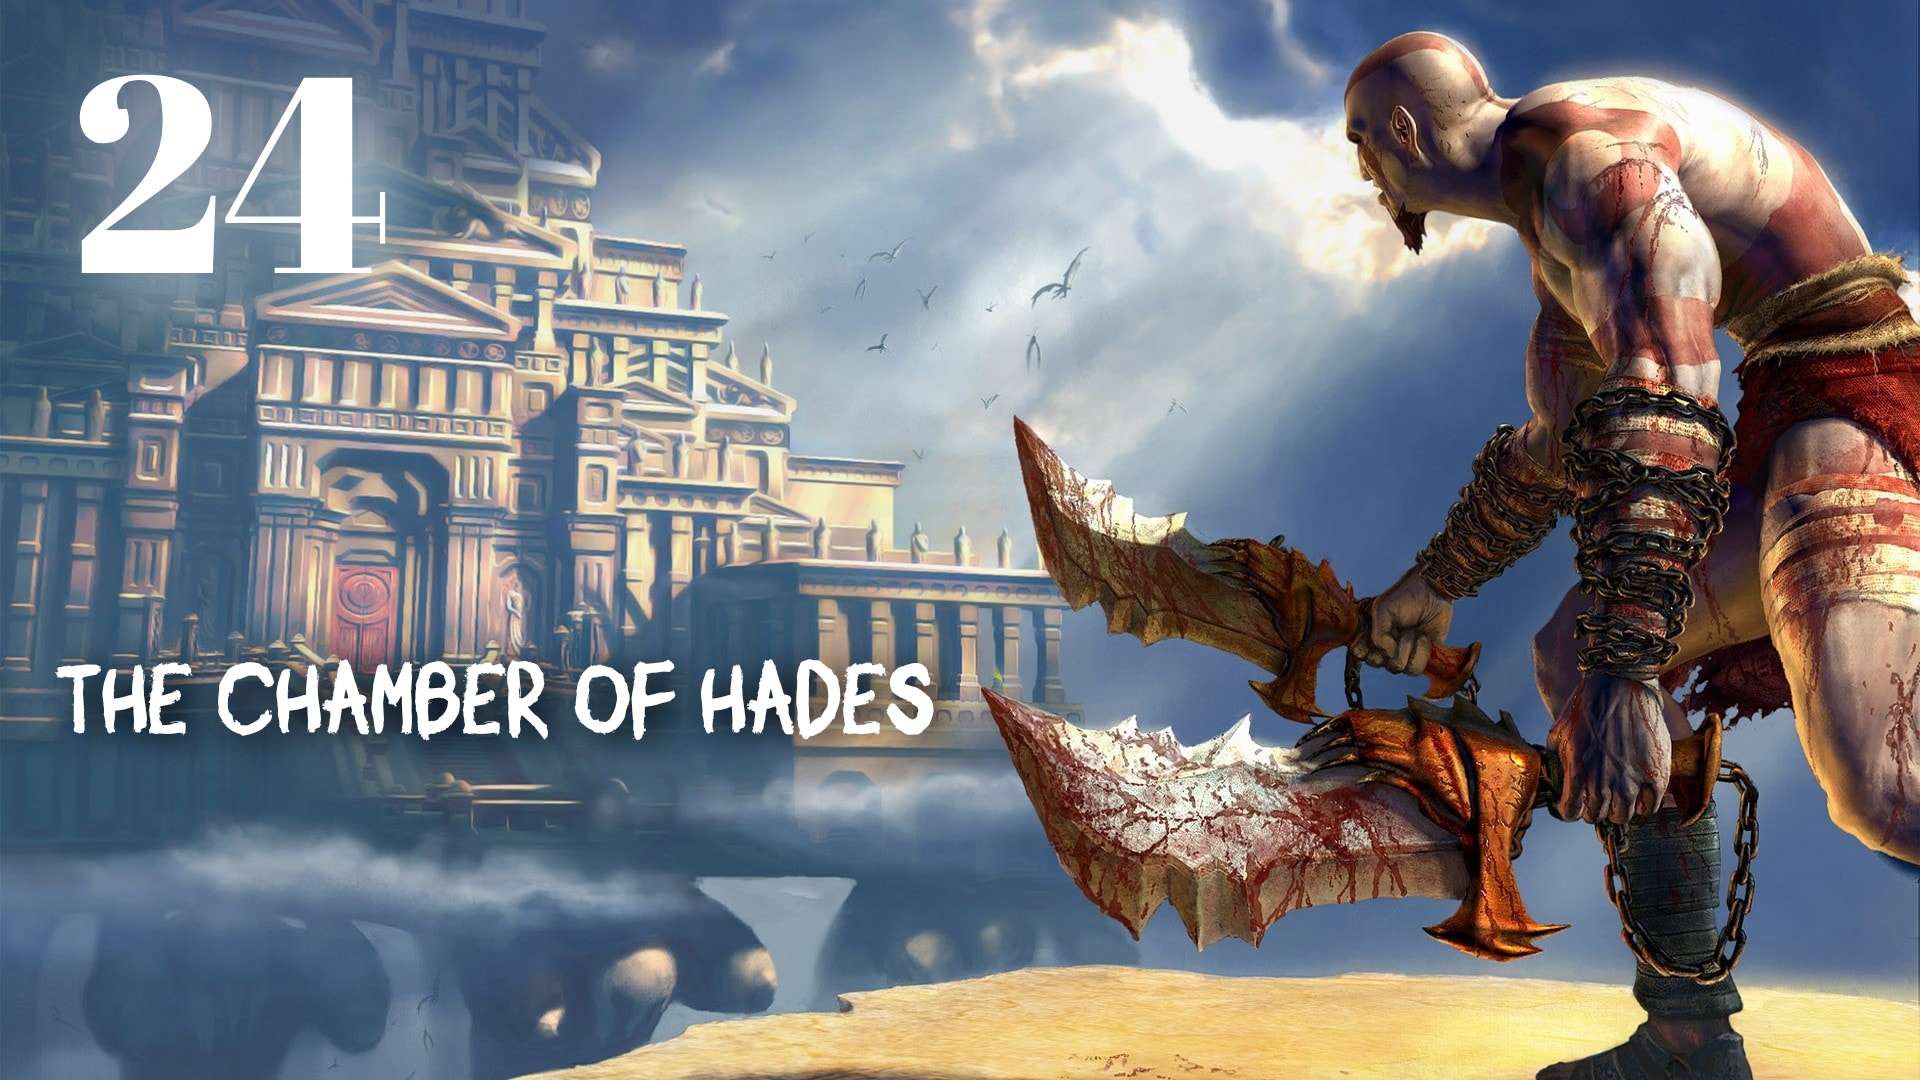 God of War HD The Challenge of Hades: The Chamber of Hades